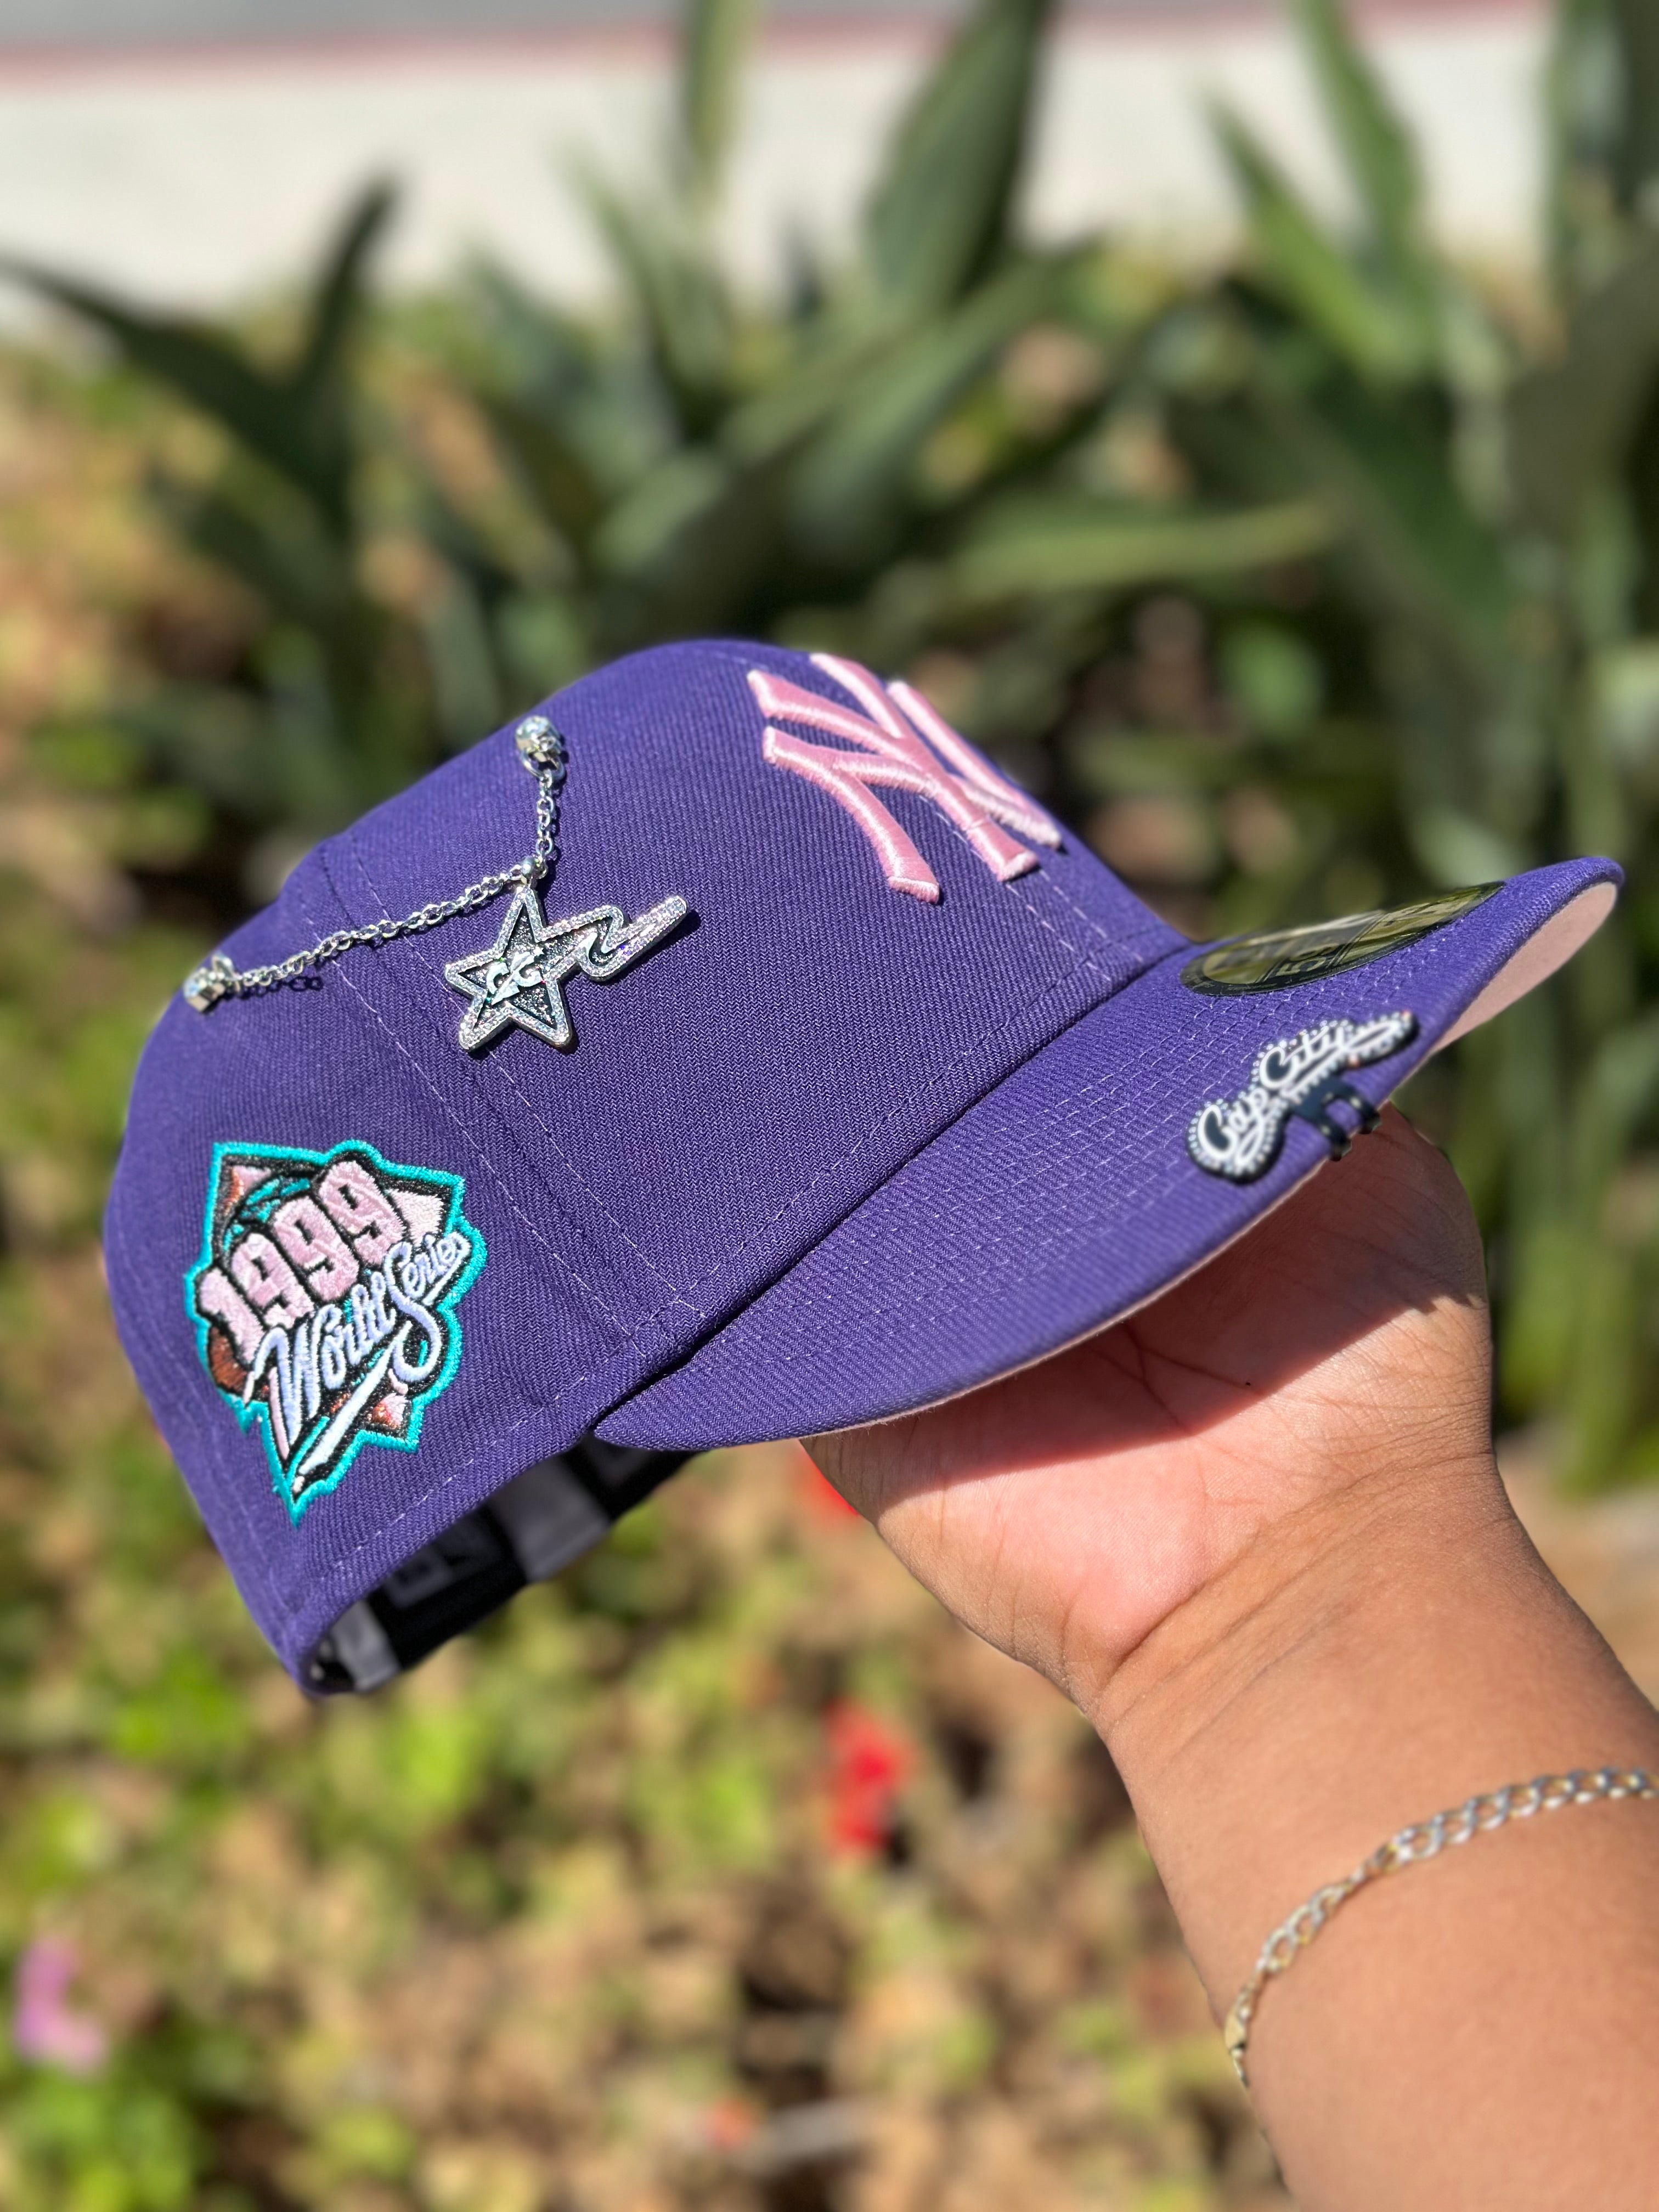 NEW ERA EXCLUSIVE 59FIFTY PURPLE NEW YORK YANKEES W/ 1999 WORLD SERIES SIDE PATCH